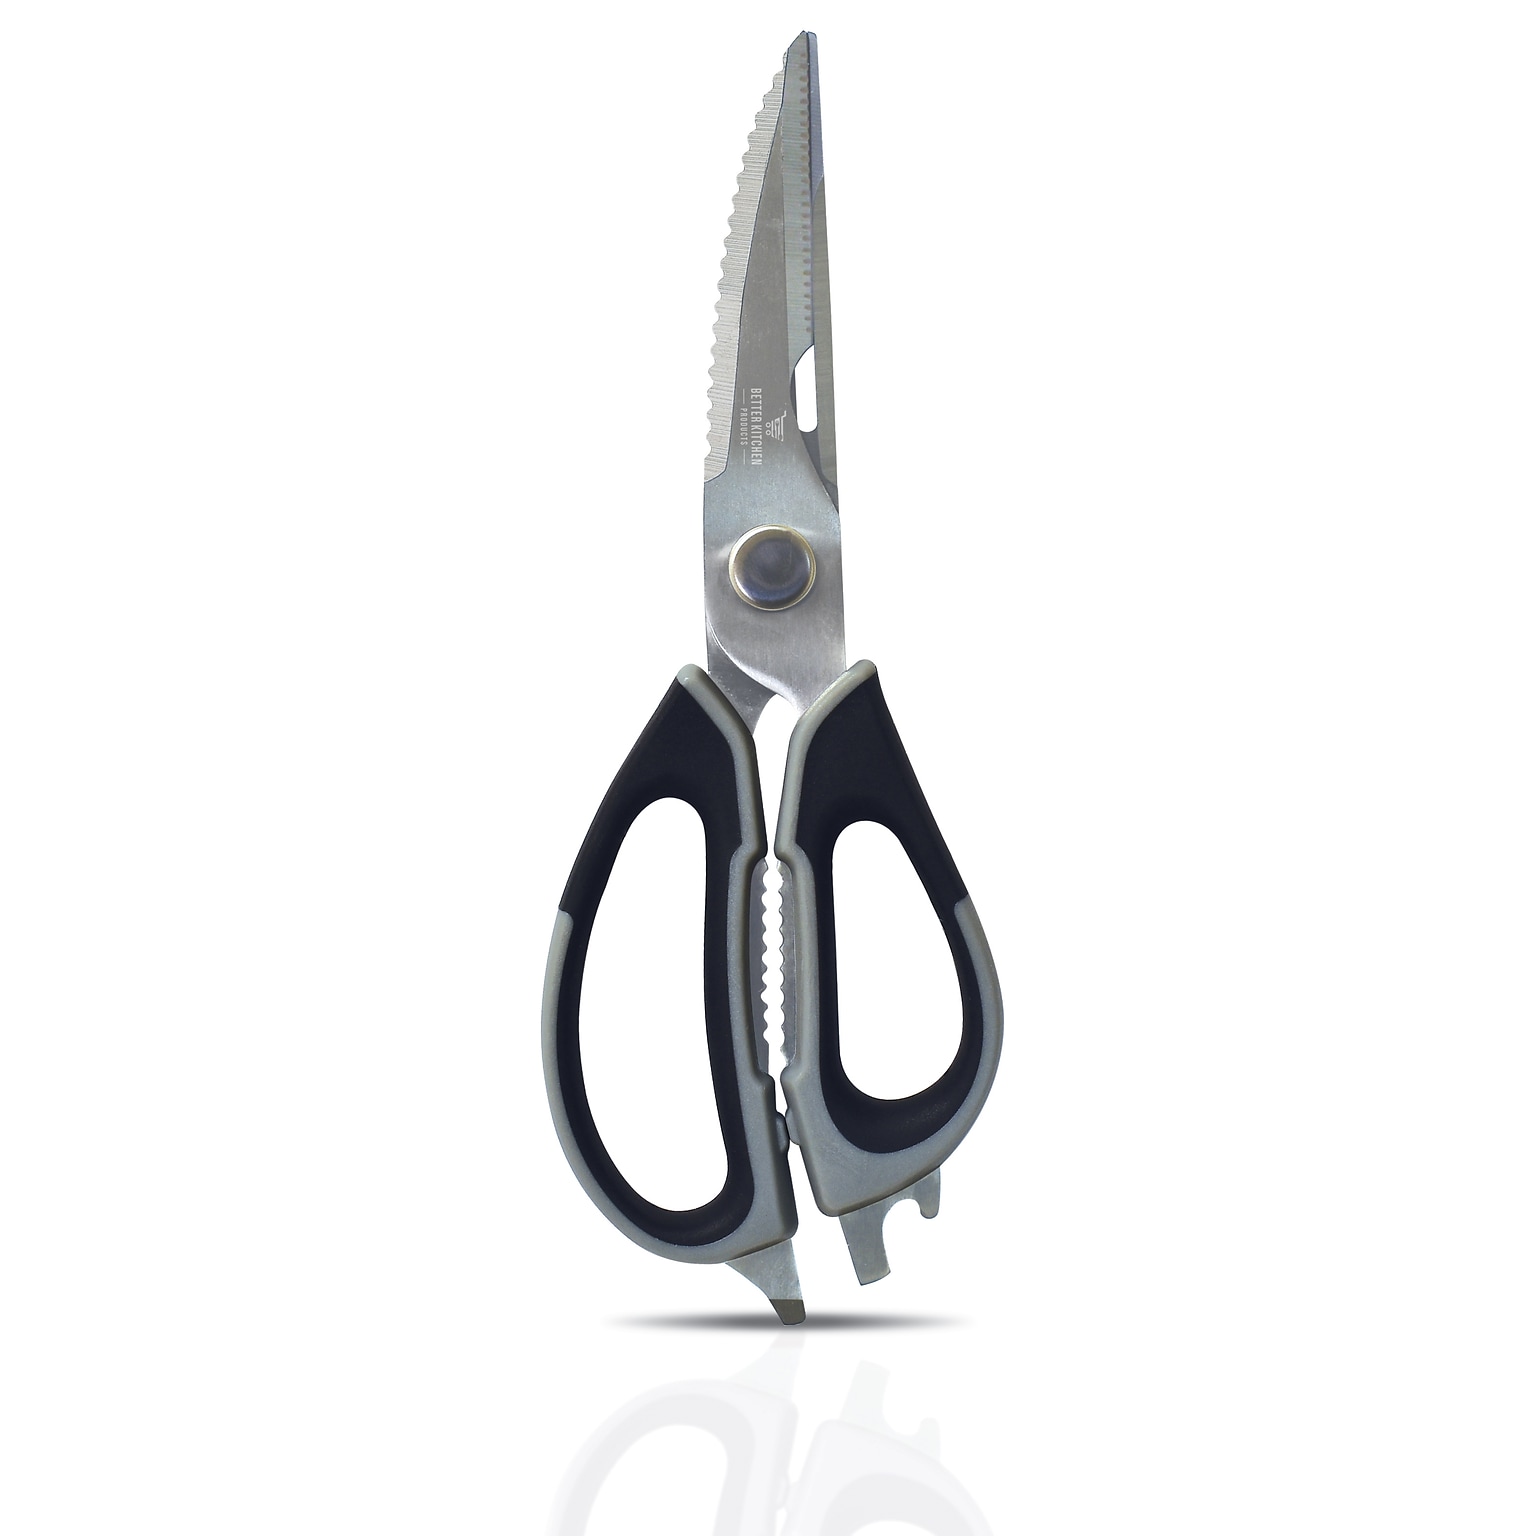 Better Kitchen Products Stainless Steel Multipurpose Kitchen Shears with Detachable Blades, 9, Black & Gray (00605)